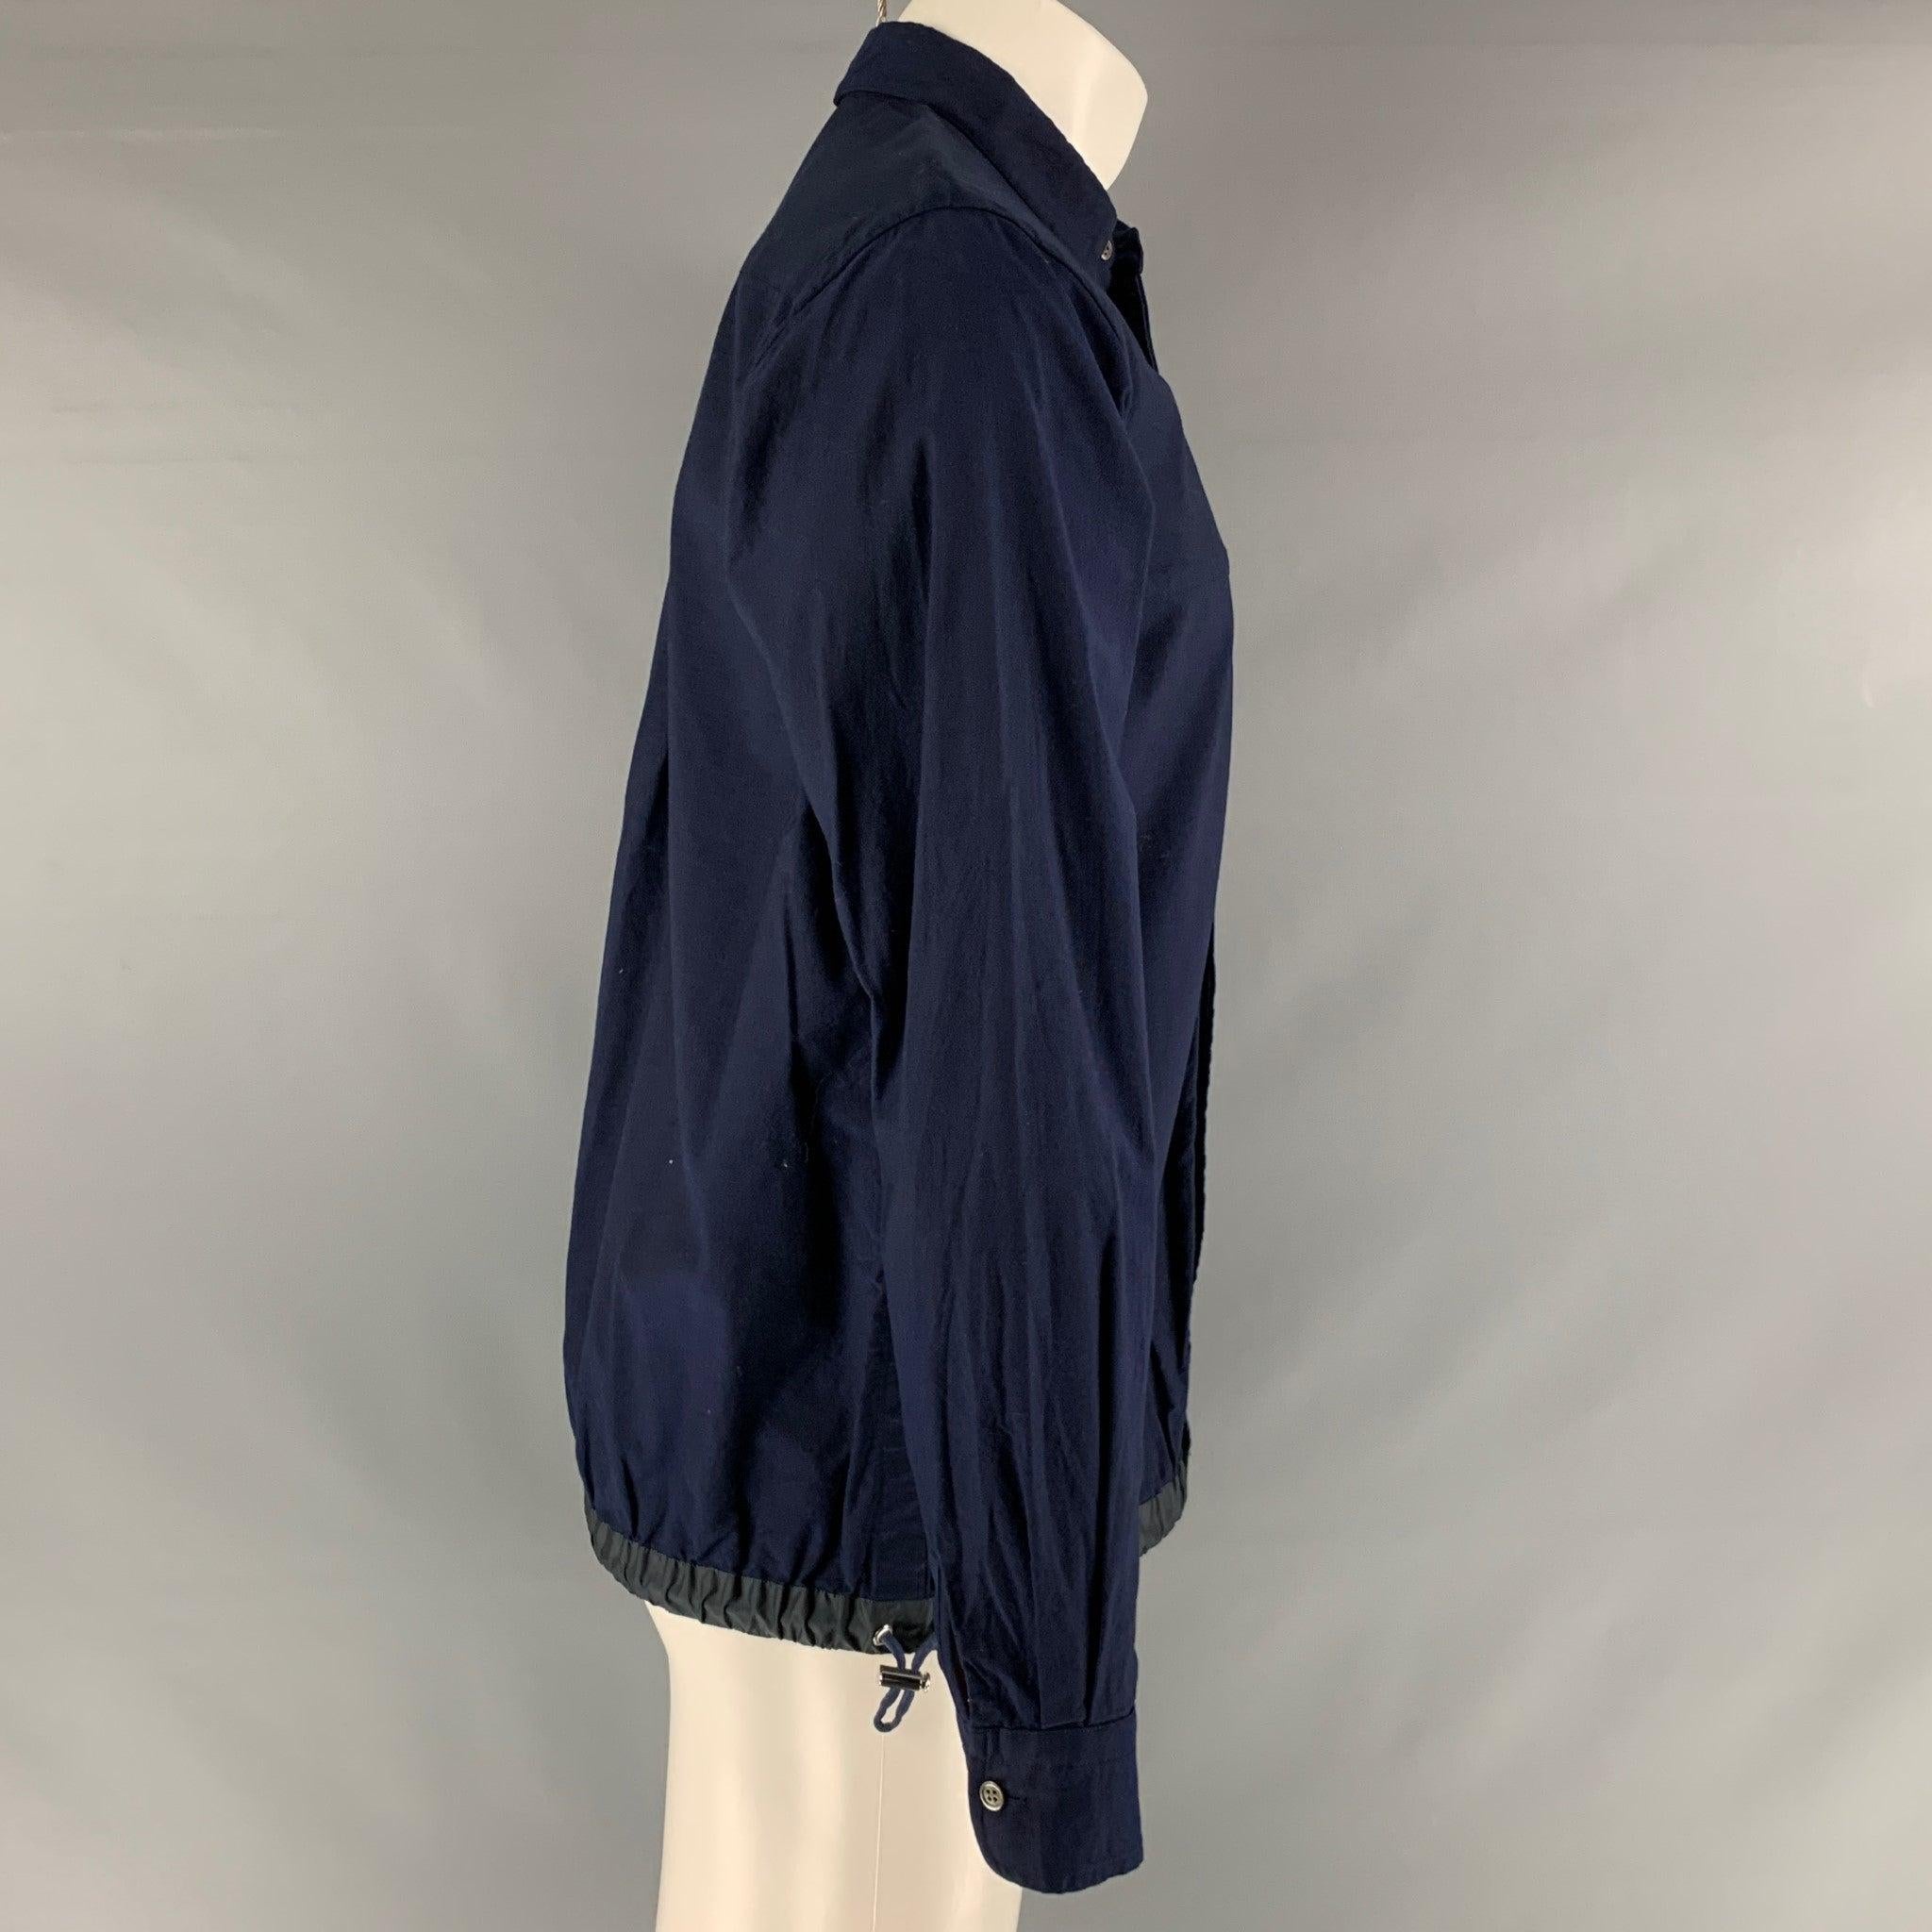 SACAI long sleeve shirt comes in a navy cotton oxford material featuring patch and welt pockets, button closure, drawstring at hem, and a button down collar. Made in Japan.Very Good Pre-Owned Condition. Minor mark at left sleeve. 

Marked:  
041